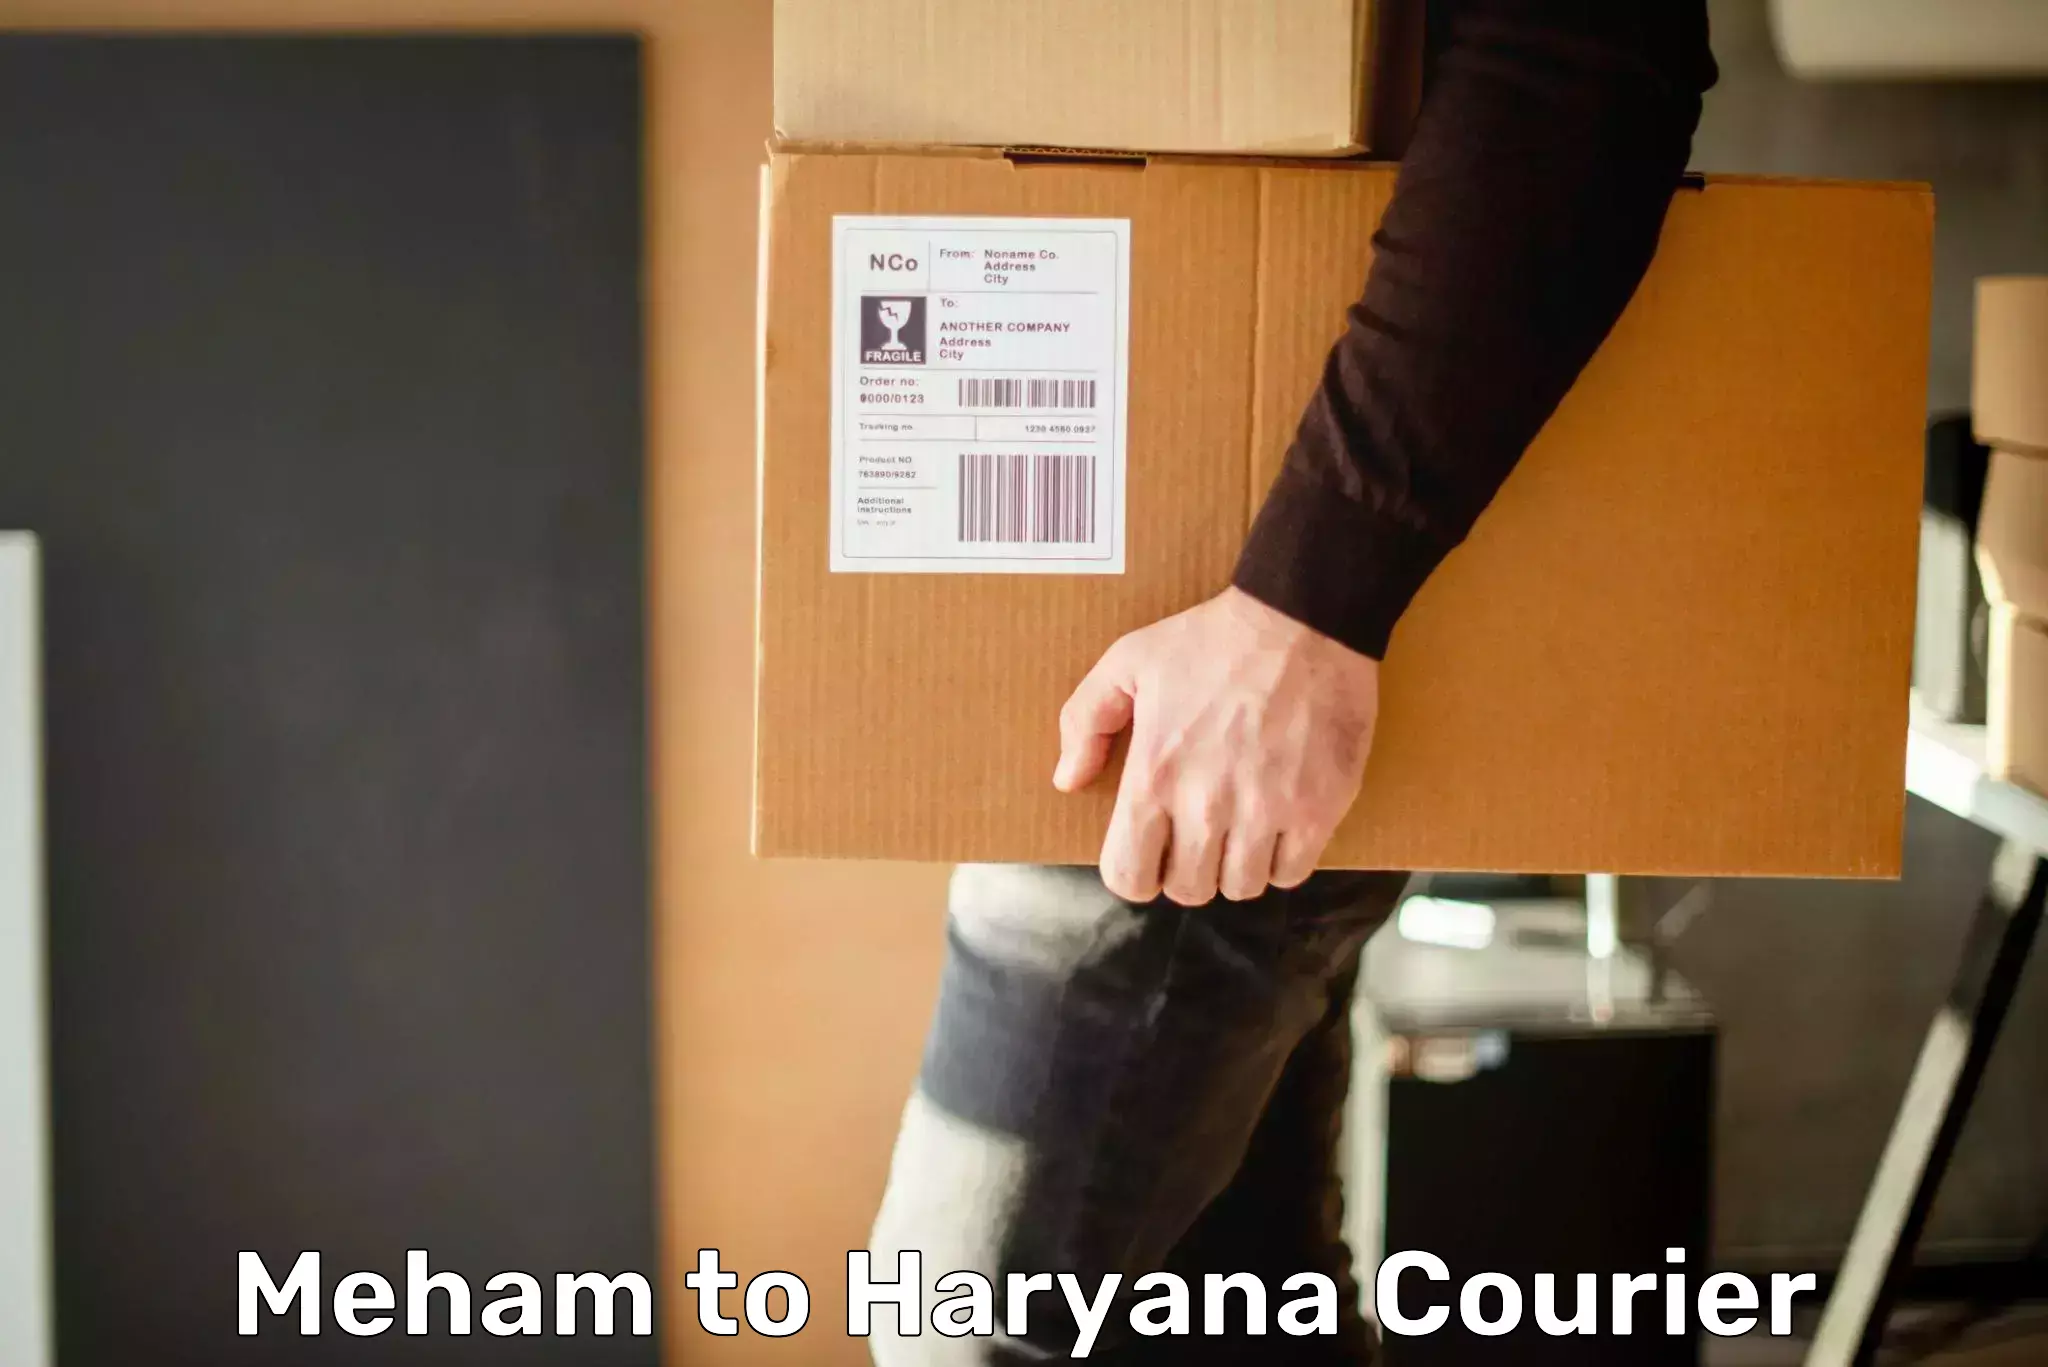 Efficient freight service Meham to NCR Haryana